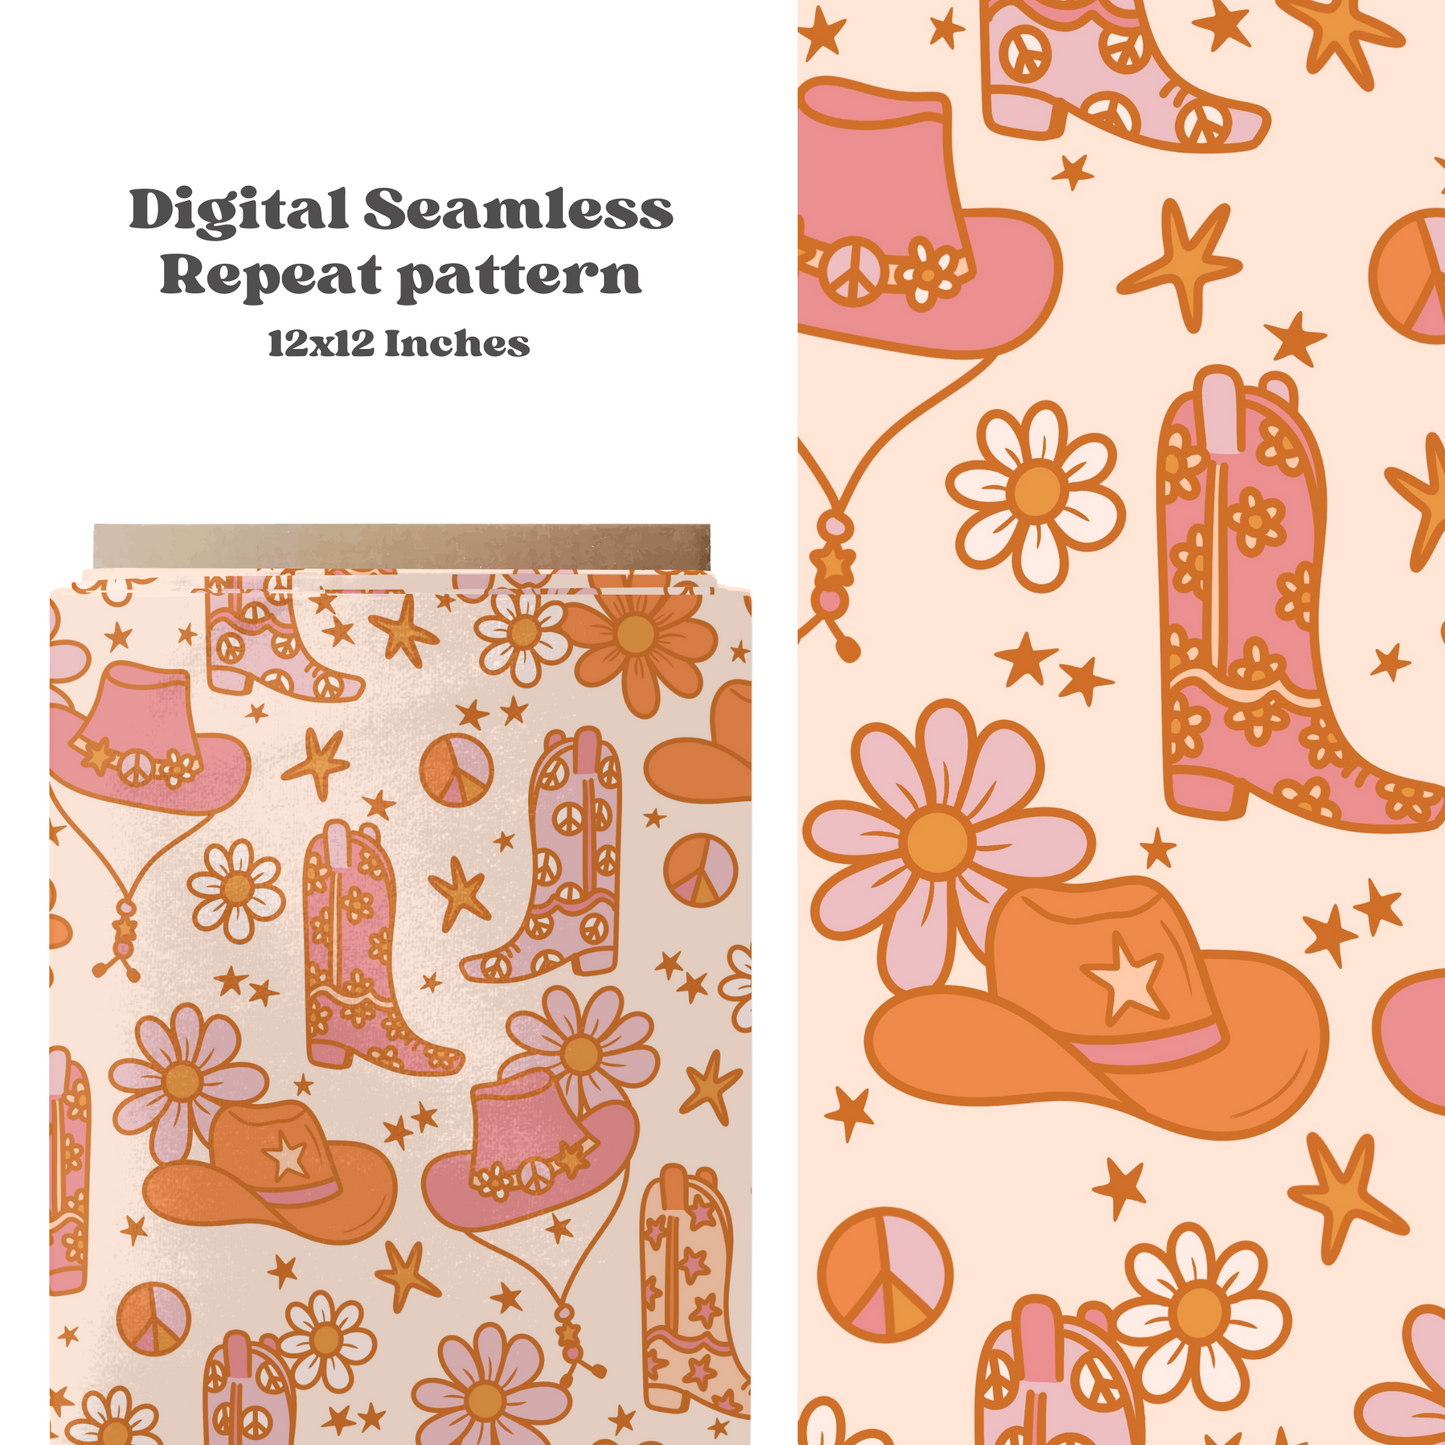 Western Floral Boots Pattern